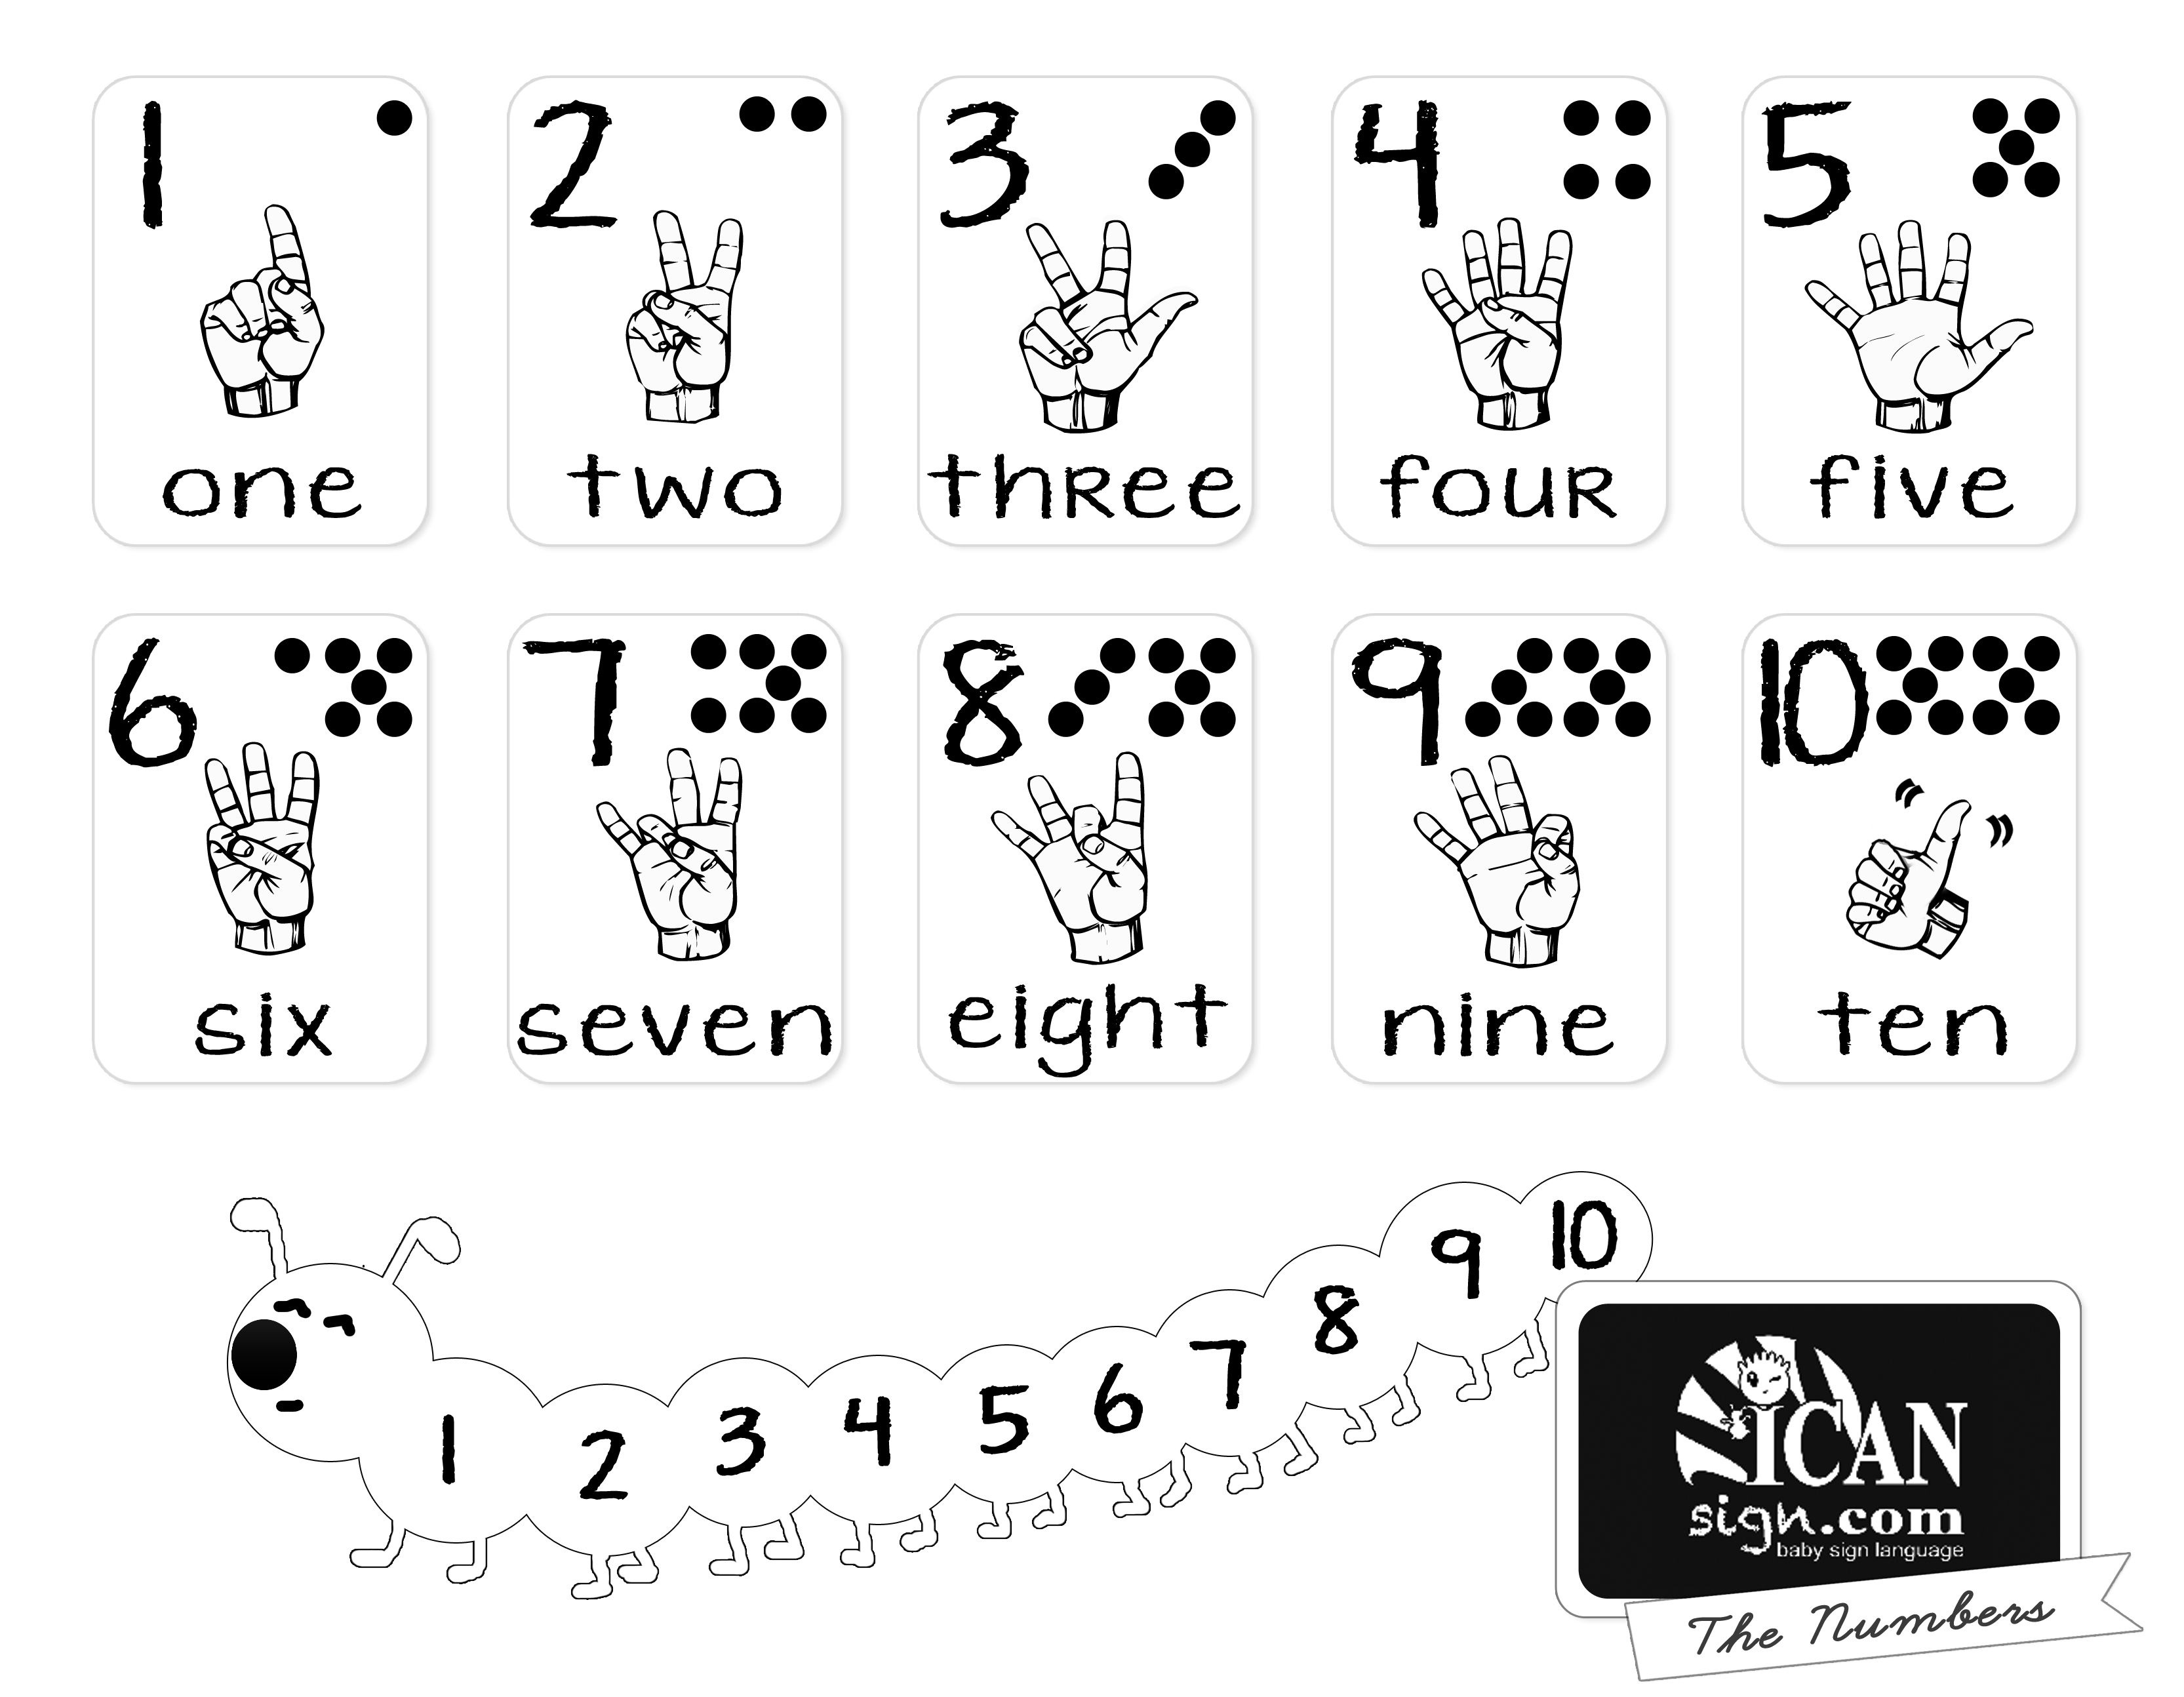 Printer-Friendly Asl Numbers Chart - Free Printable From Icansign - Sign Language Flash Cards Free Printable